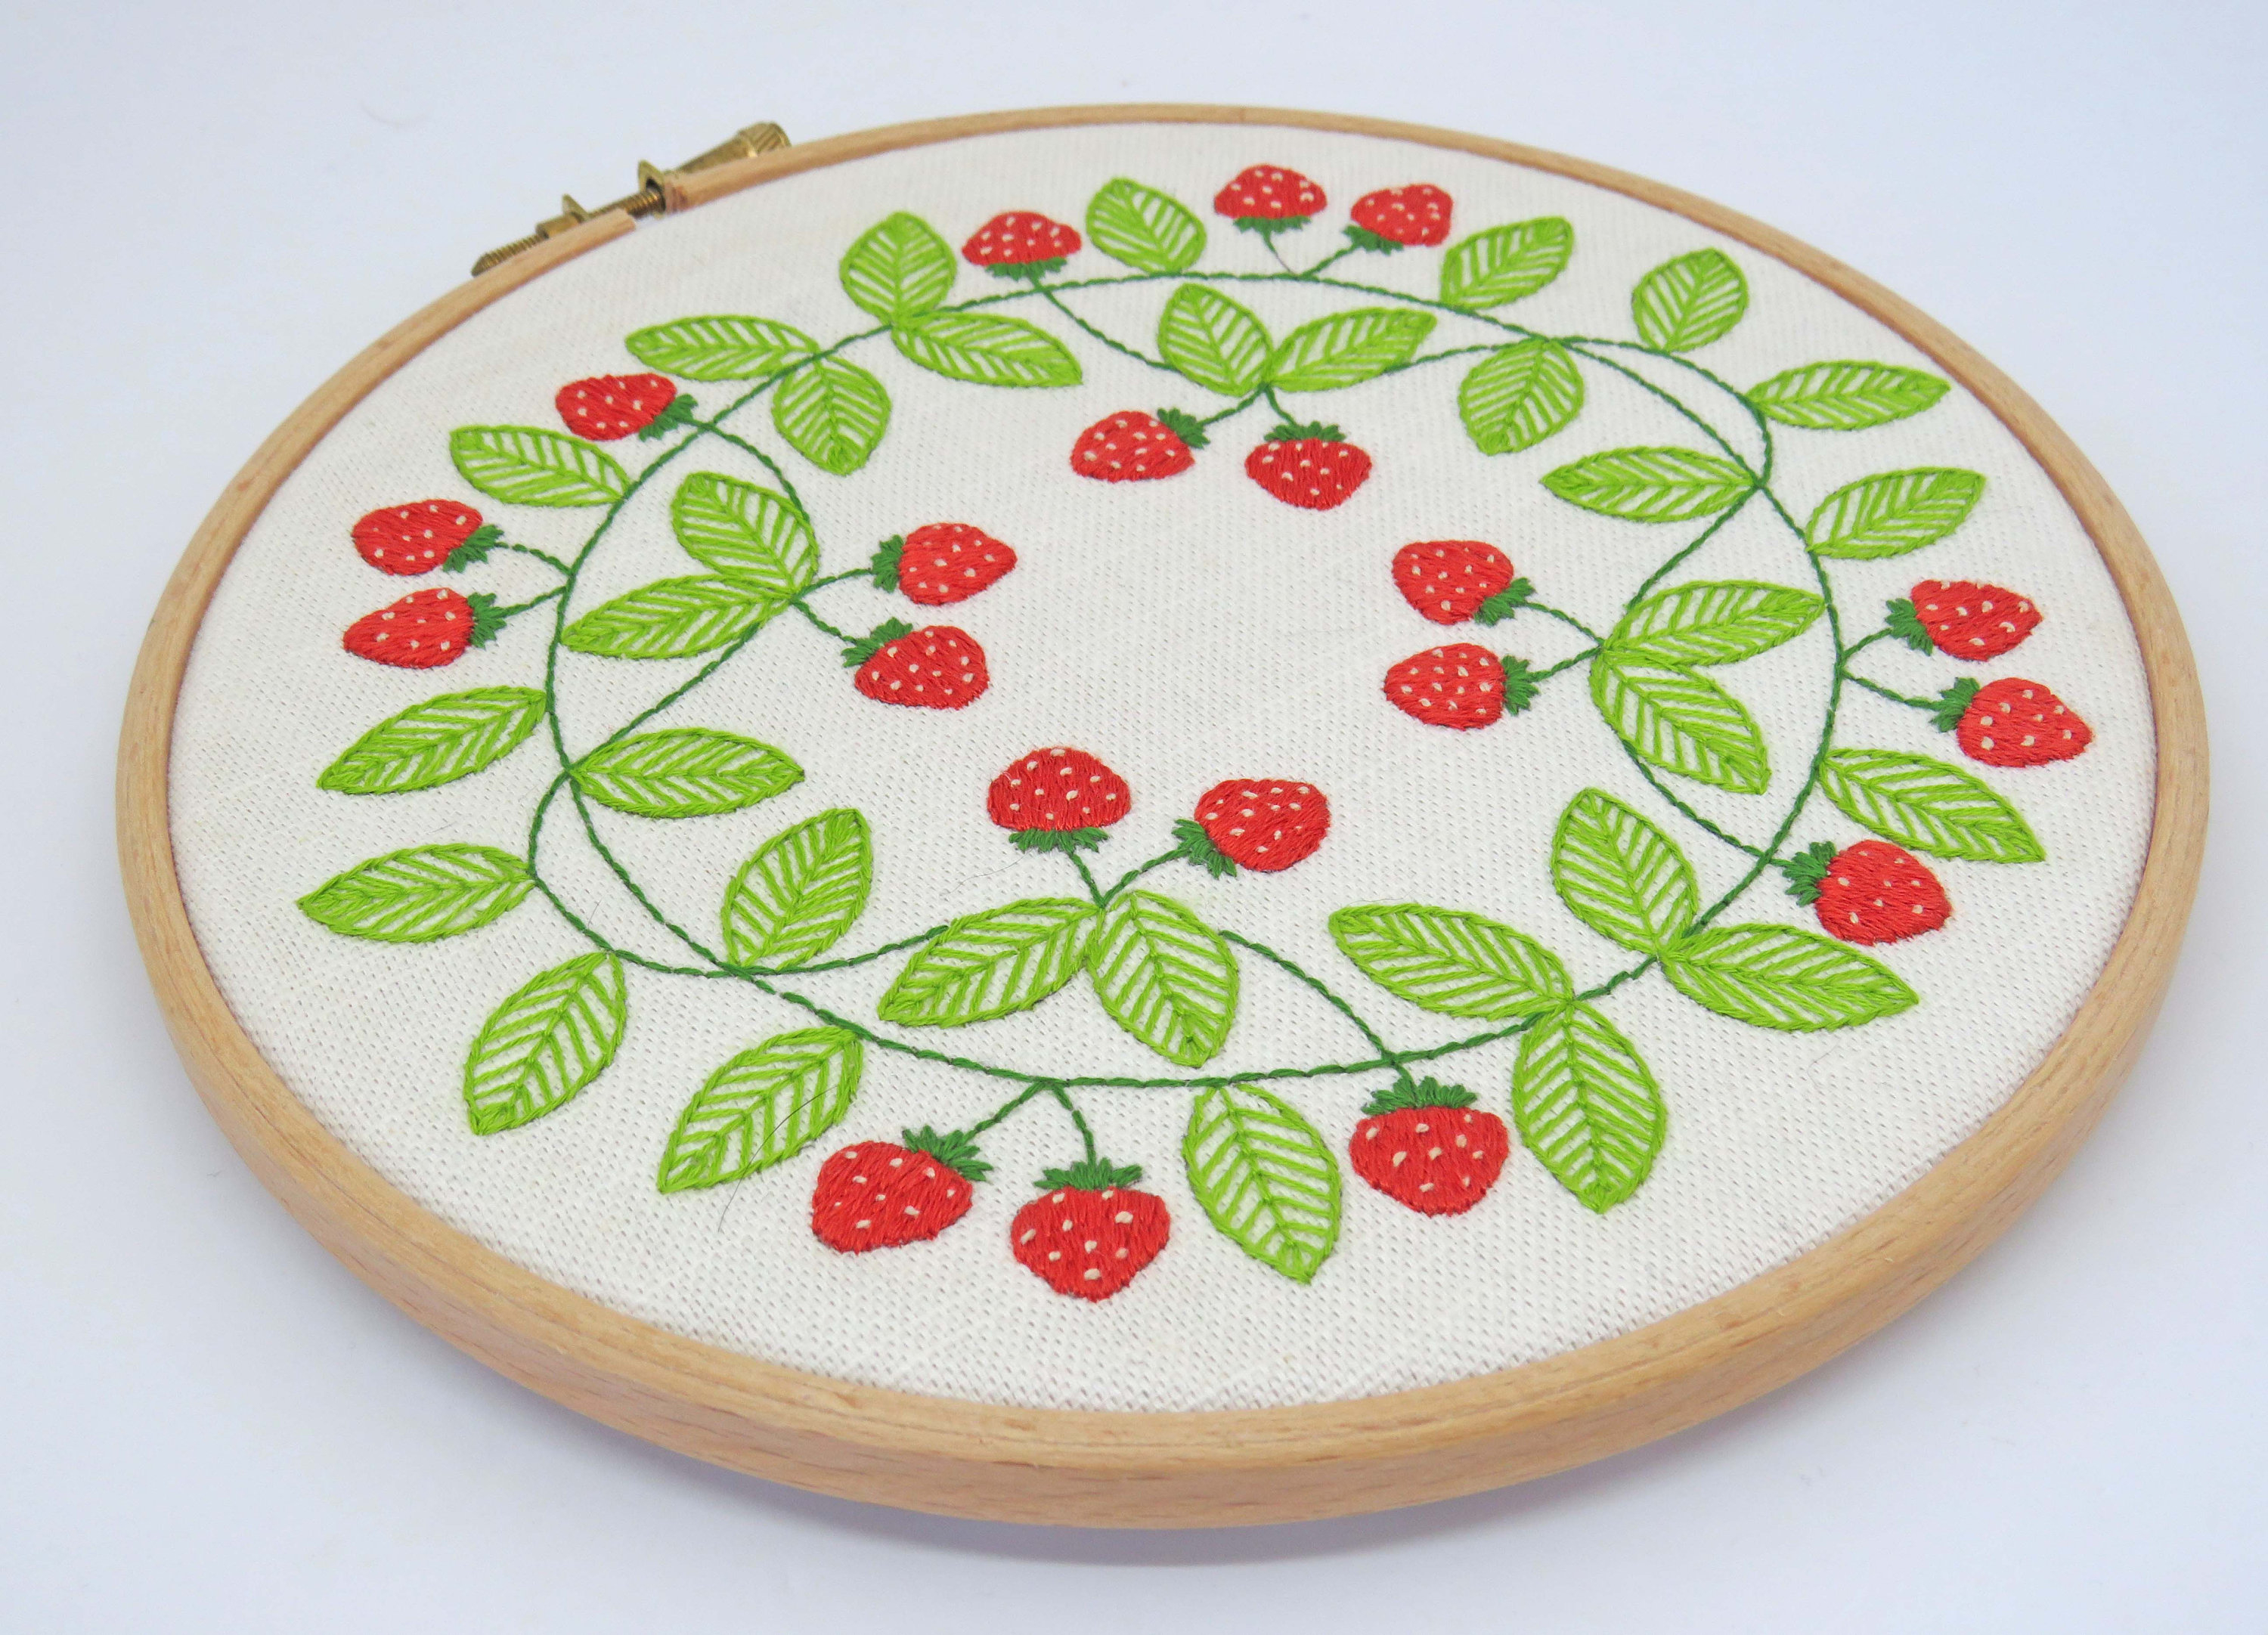 Strawberry Embroidery Pattern Hand Embroidery Pattern Pre Printed Fabric Strawberry Embroidery Design Pdf Embroidery Pattern Embroidery Hoop Art